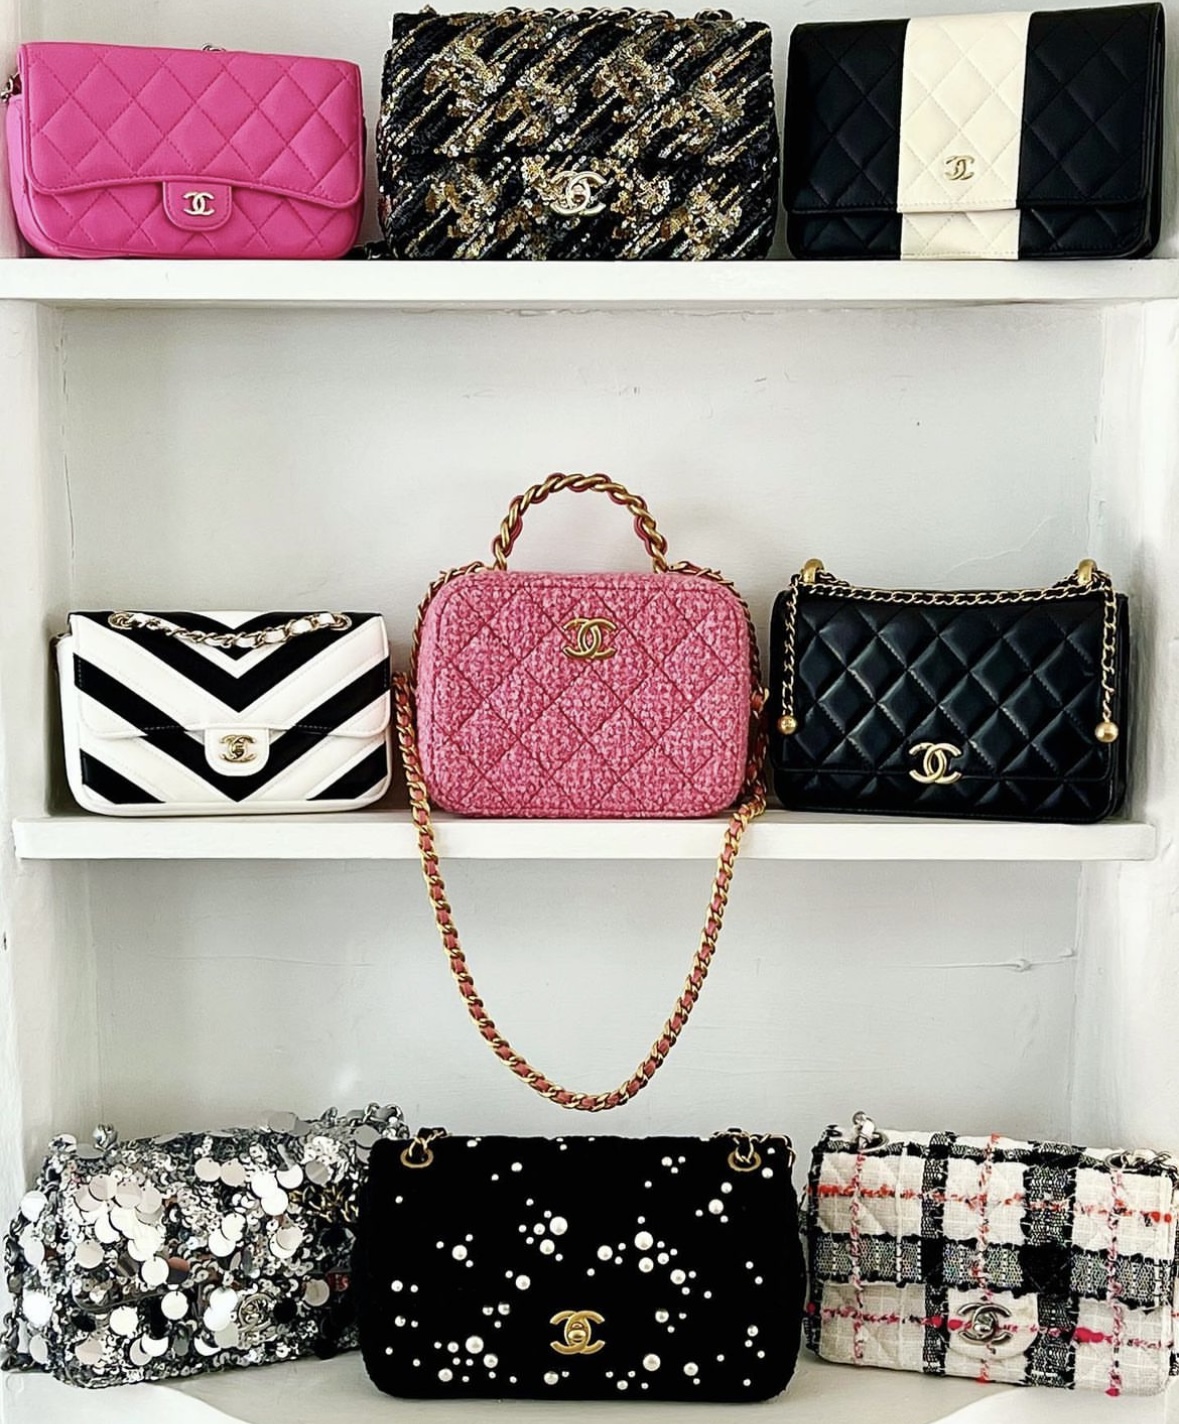 chanel price increase 2023 | second chanel price increase 2023 | chanel flap bag price increase | chanel bag prices going up